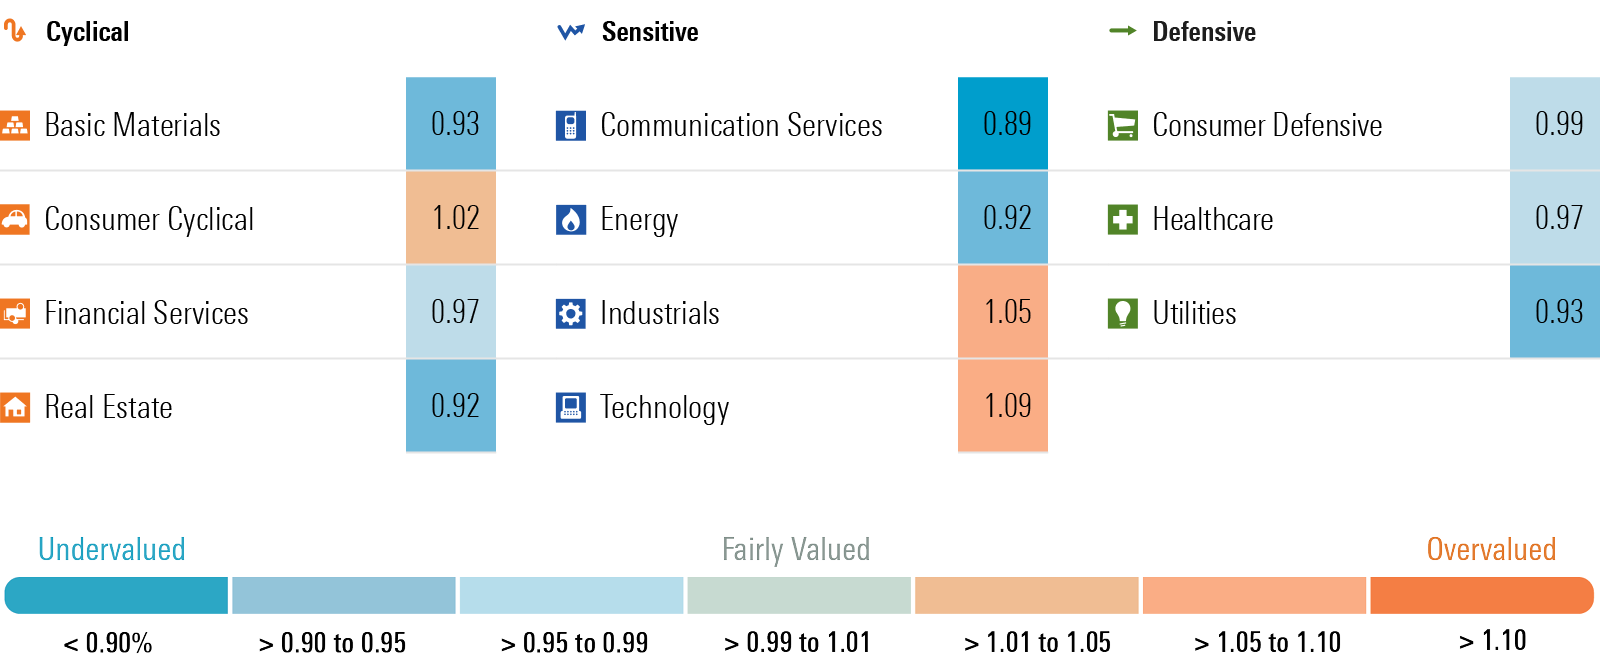 Graphic of Morningstar's Price to Fair Value metric by sector.